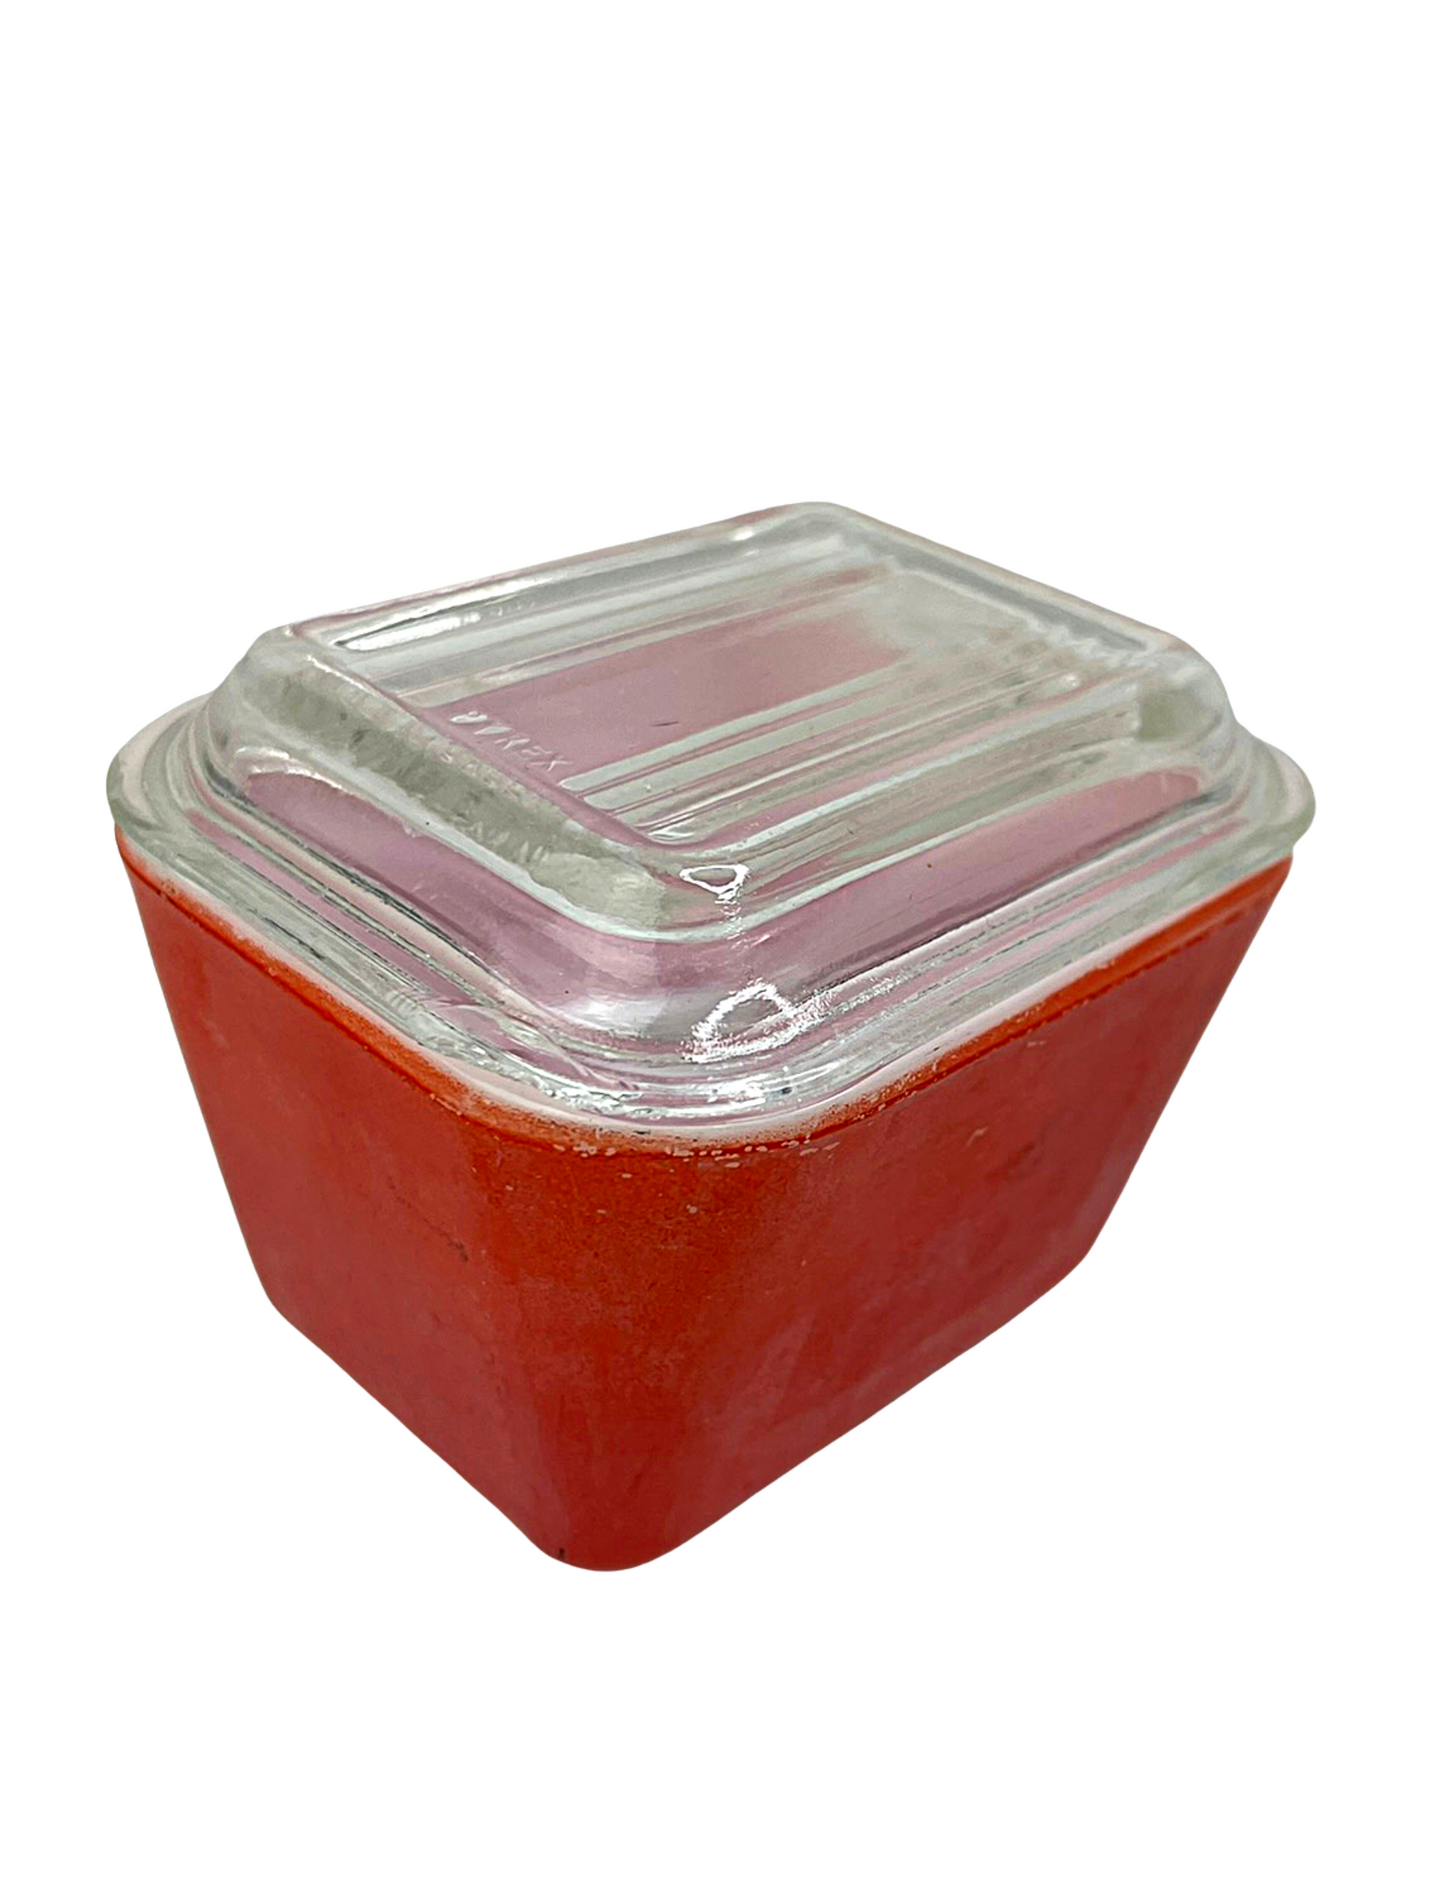 Vintage PYREX Refrigerator Dish Primary Red #501 Food Storage Container 3.75” H x 4” W